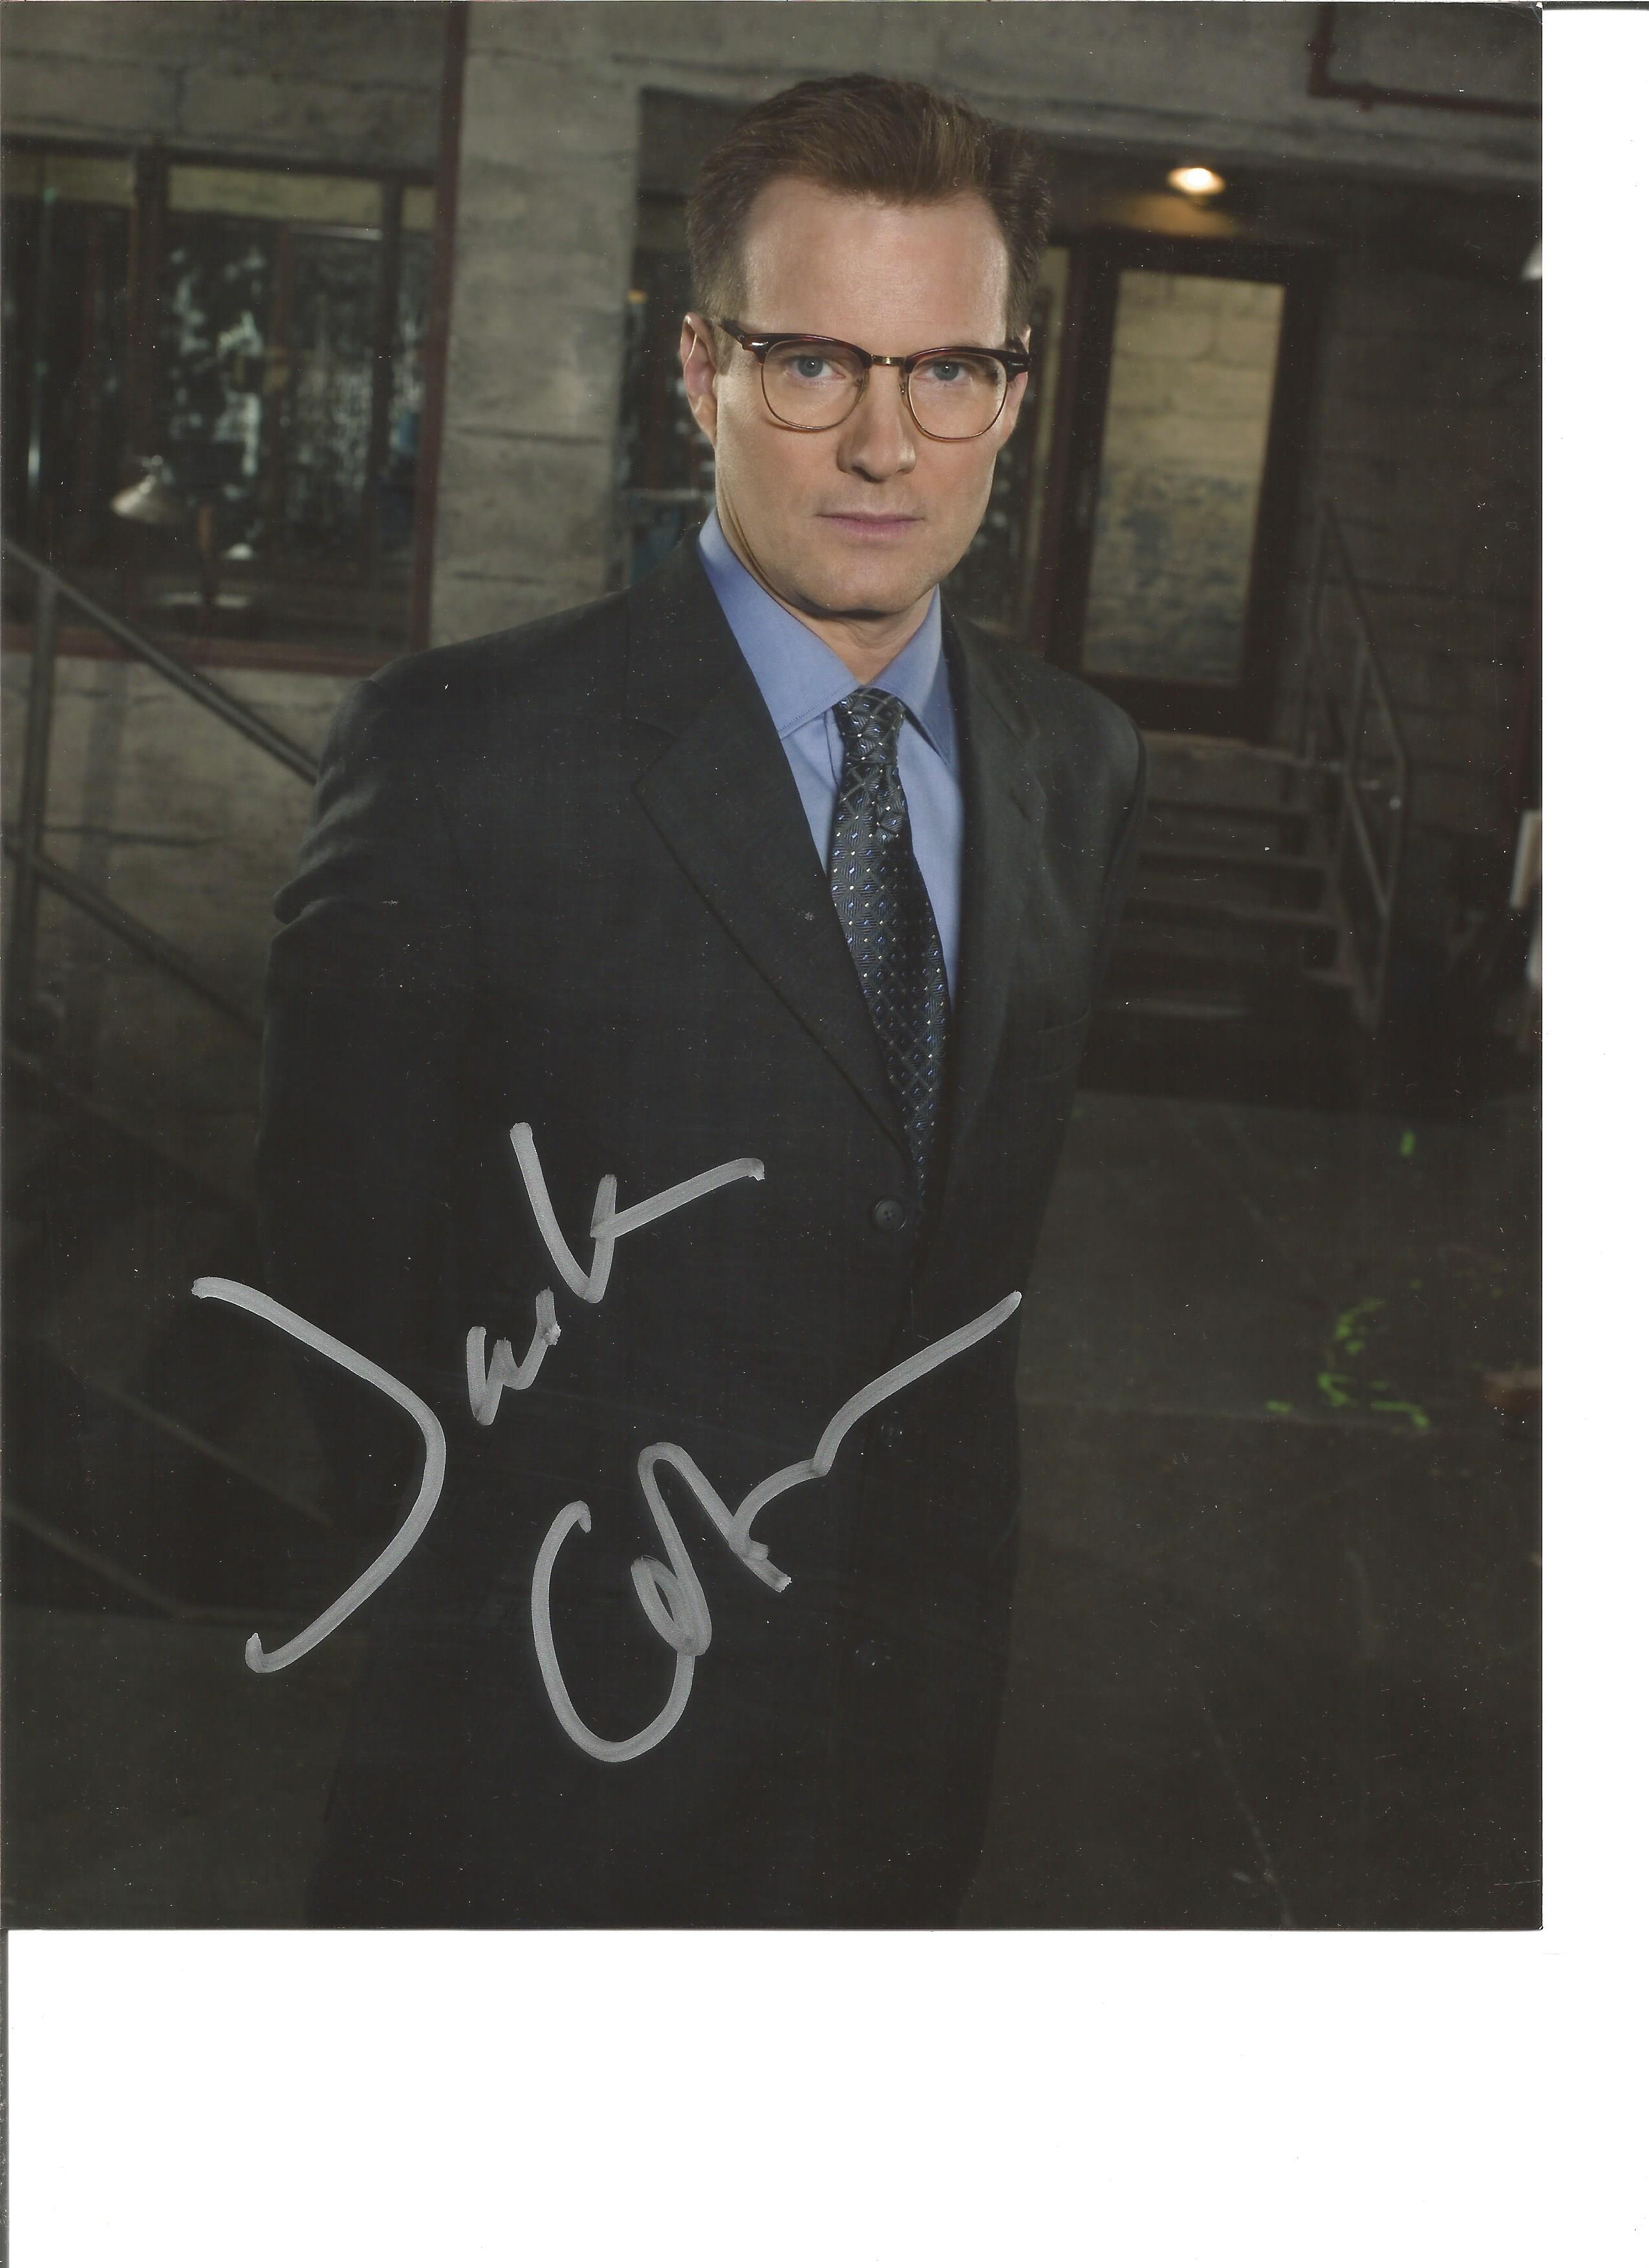 Lot of 3 Heroes hand signed 10x8 photos. This beautiful set of 3 hand-signed photos depict - Image 2 of 3